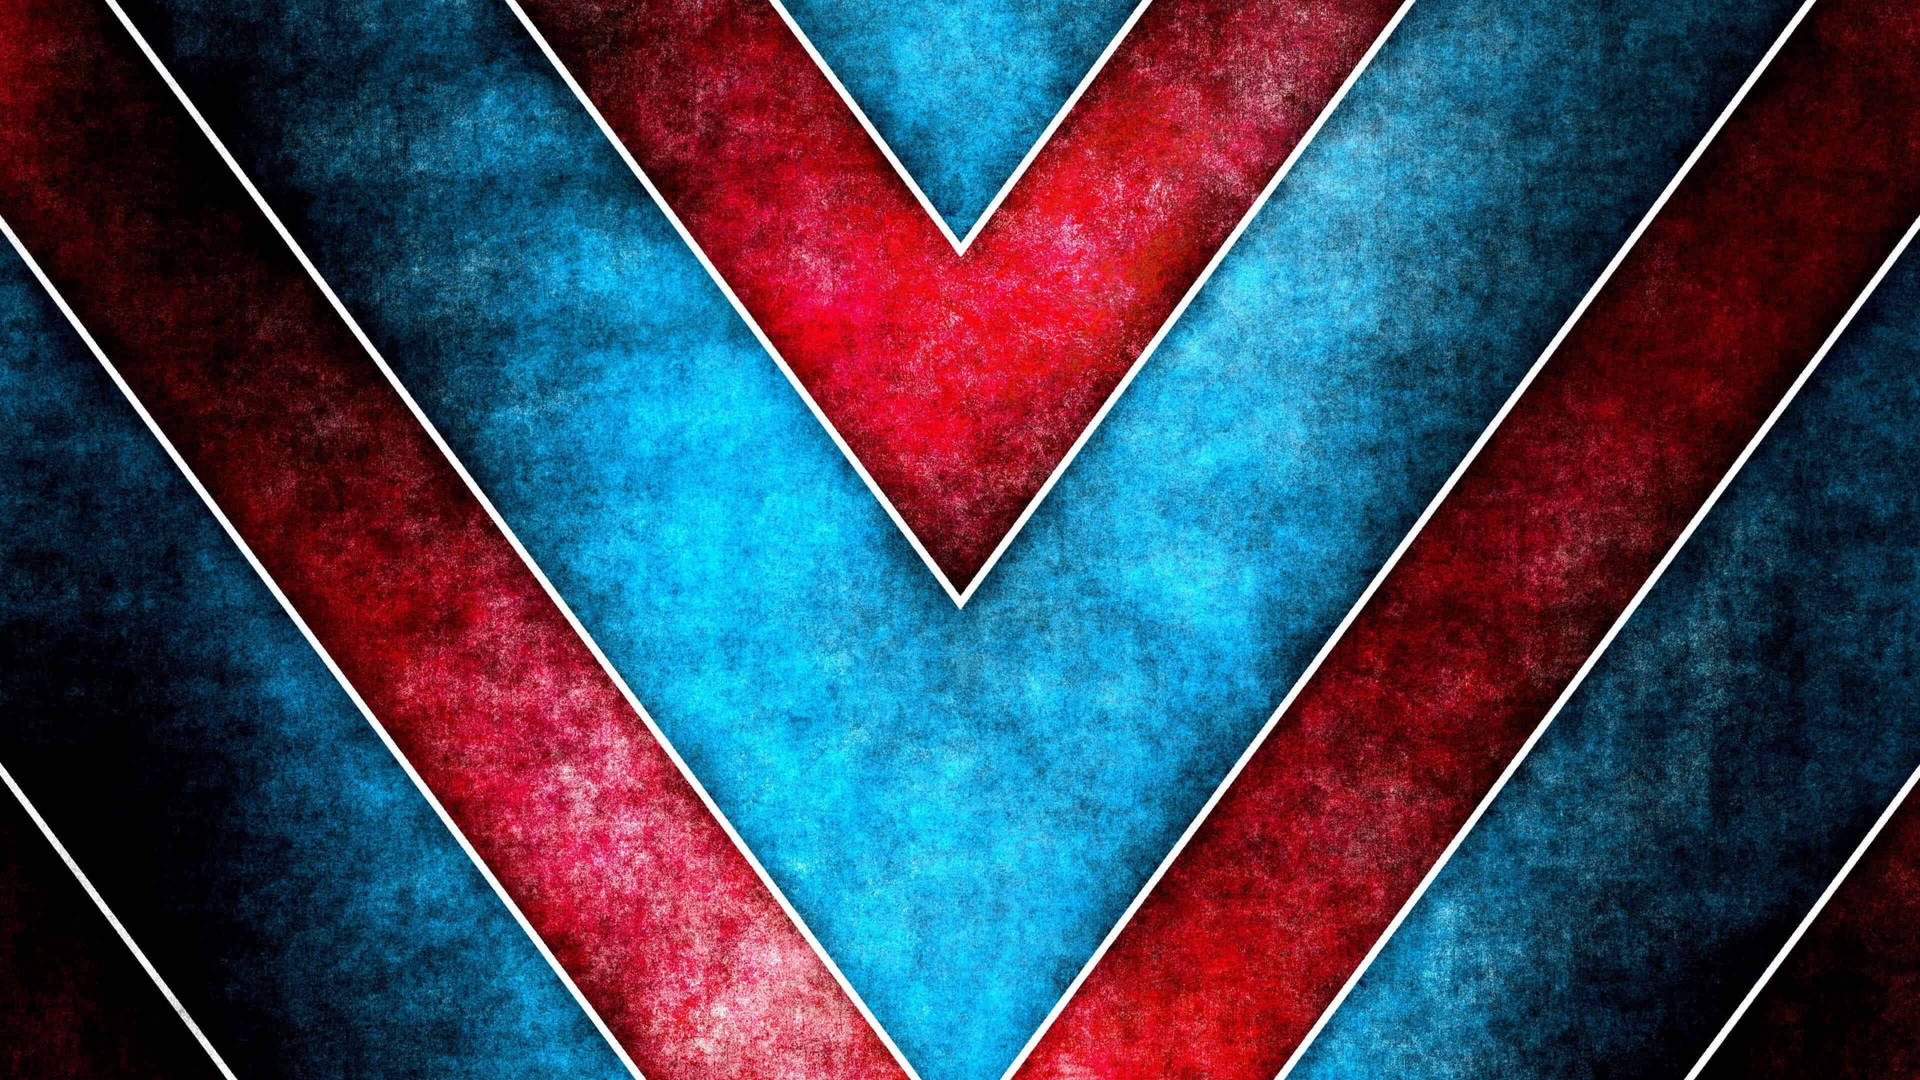 Red And Blue Triangular Pattern Wallpaper